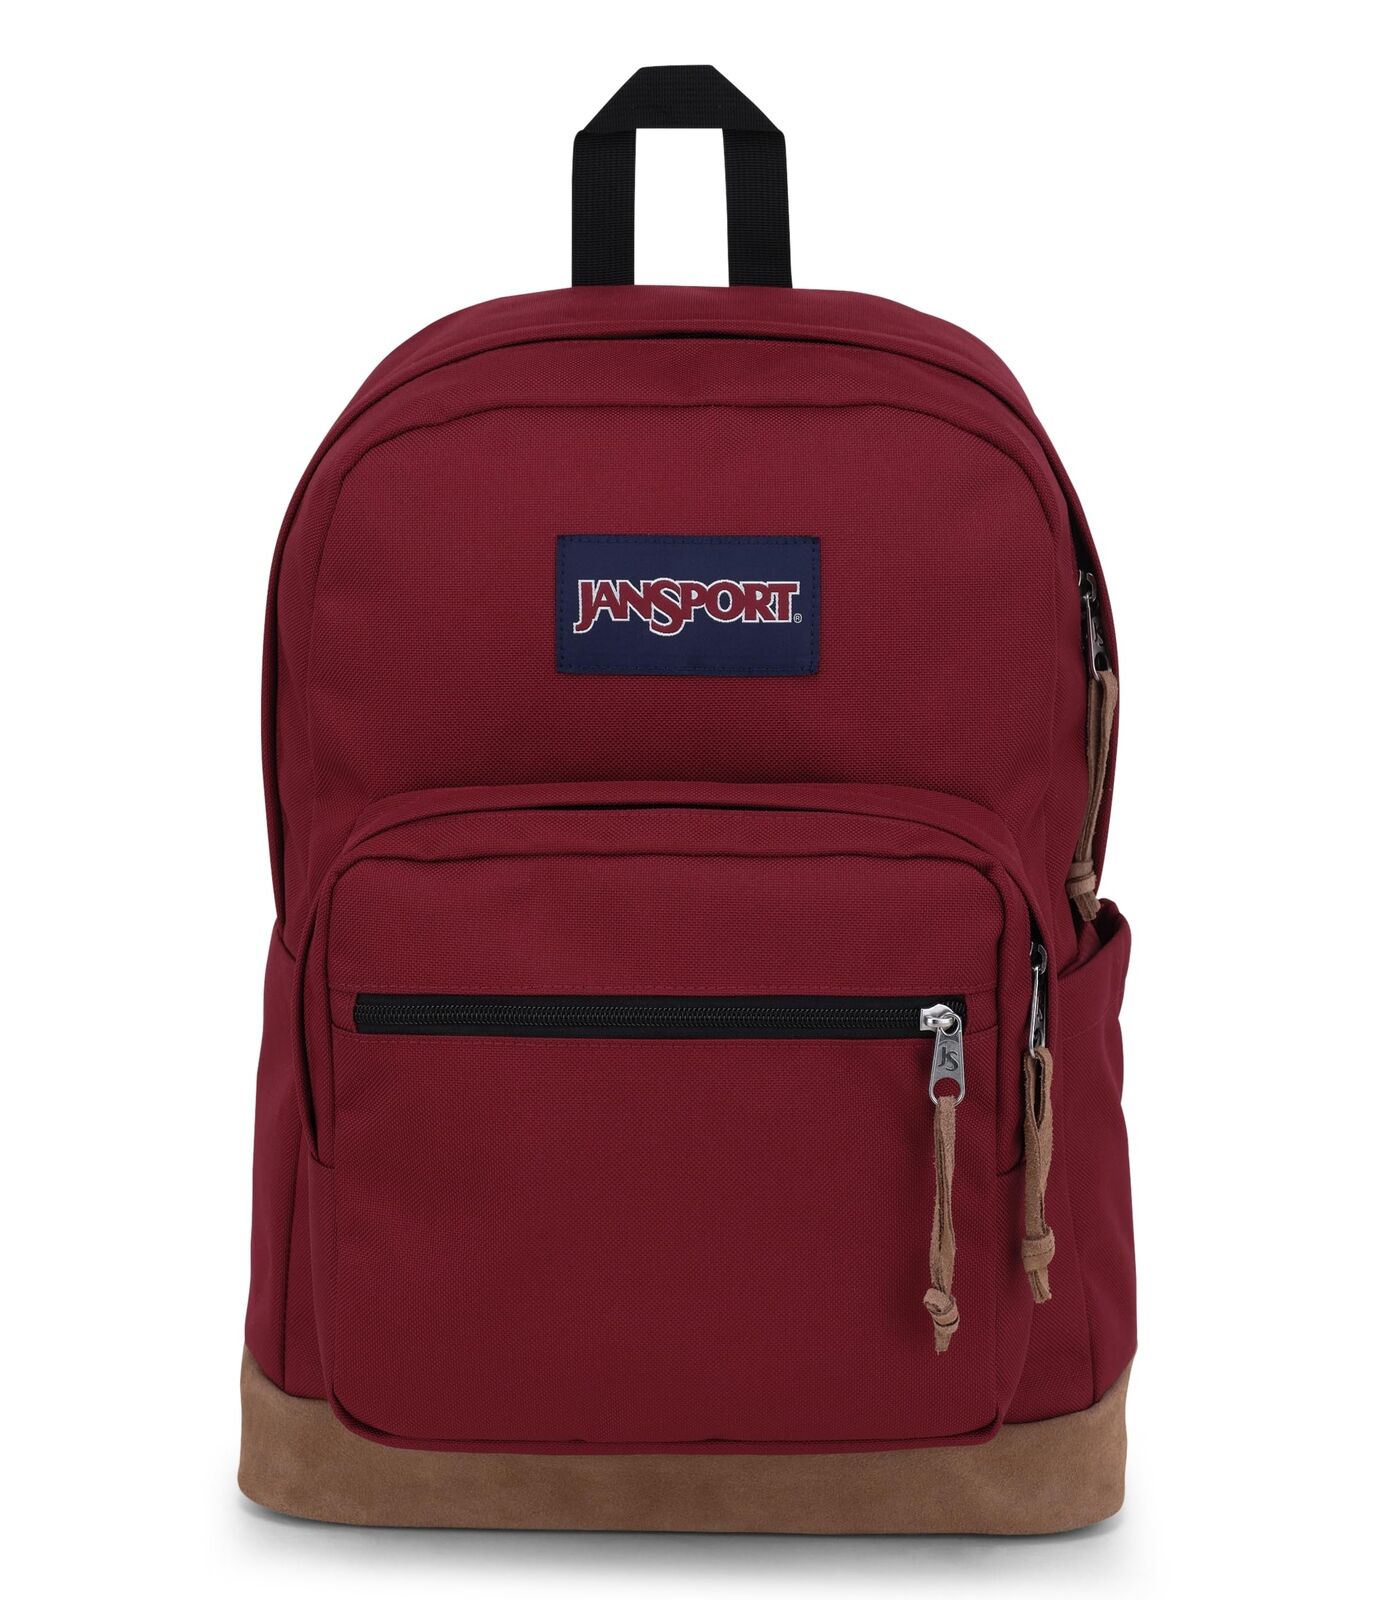 JanSport Right Pack Backpack - Travel, Work, or Laptop One Size, Russet Red 